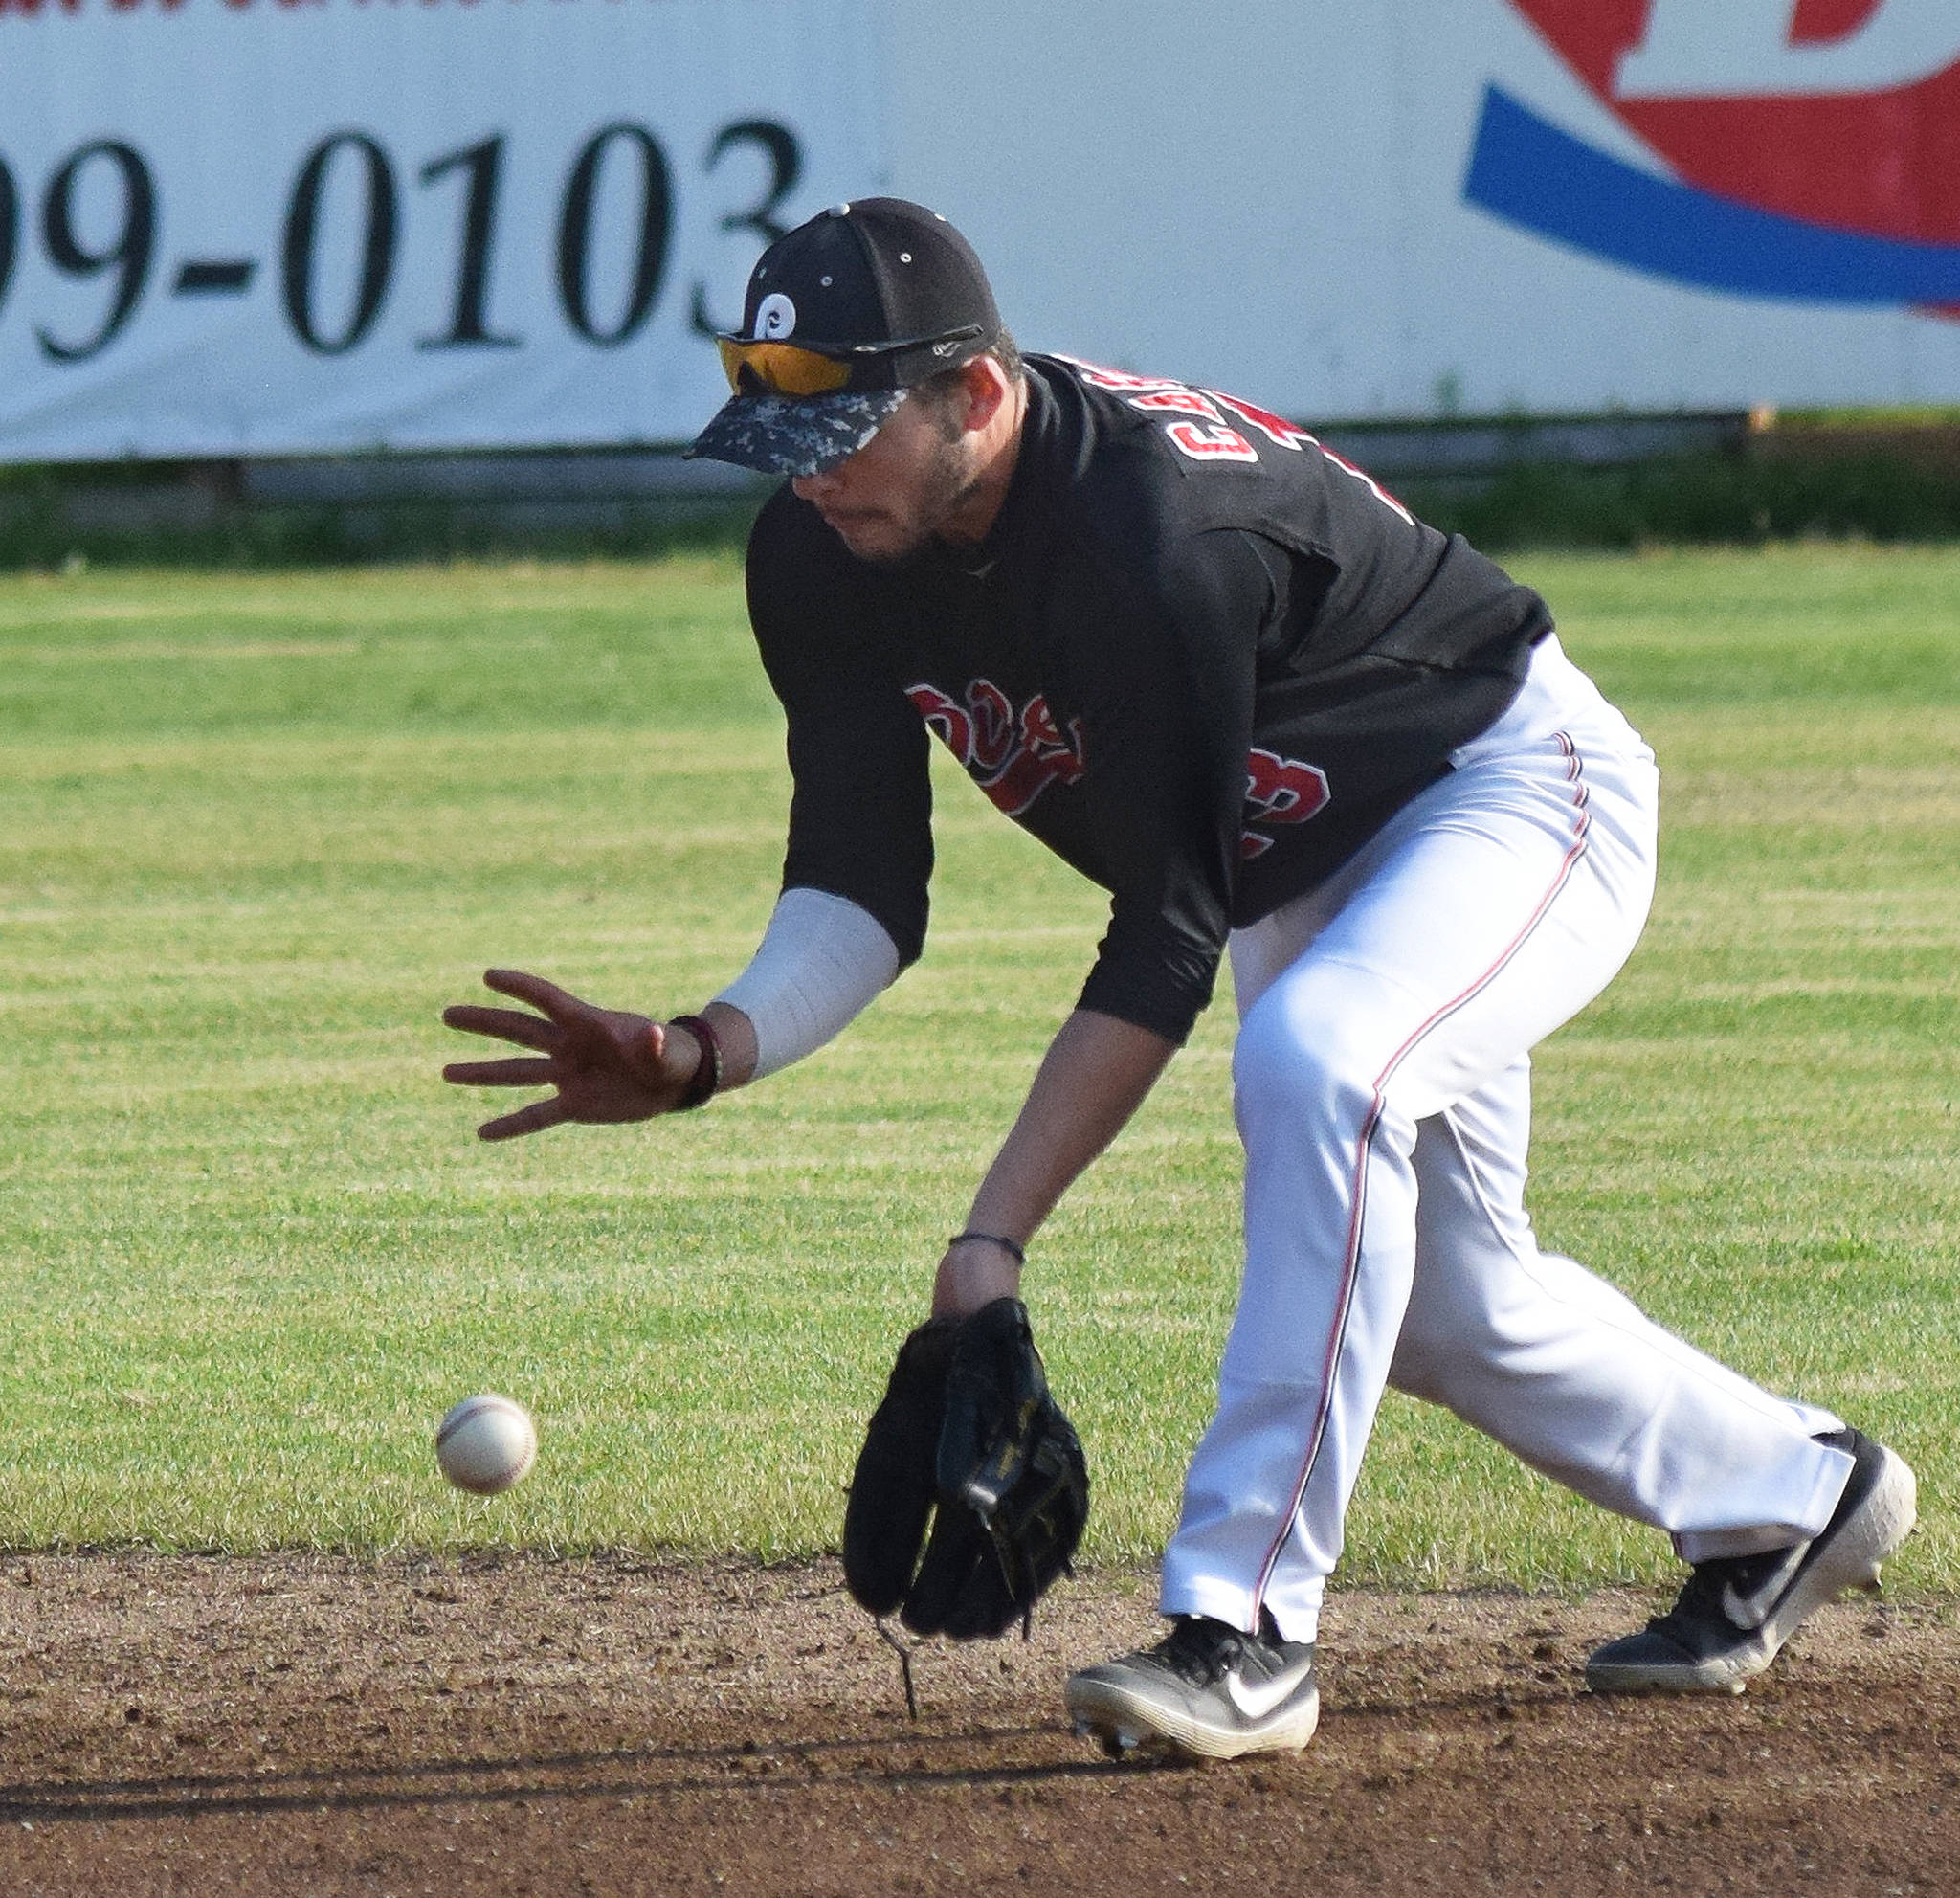 Peninsula Oilers second baseman Victor Carlino scoops up a ground ball from a Mat-Su Miners batter Friday, July 5, 2019, at Coral Seymour Memorial Park in Kenai, Alaska. (Photo by Joey Klecka/Peninsula Clarion)